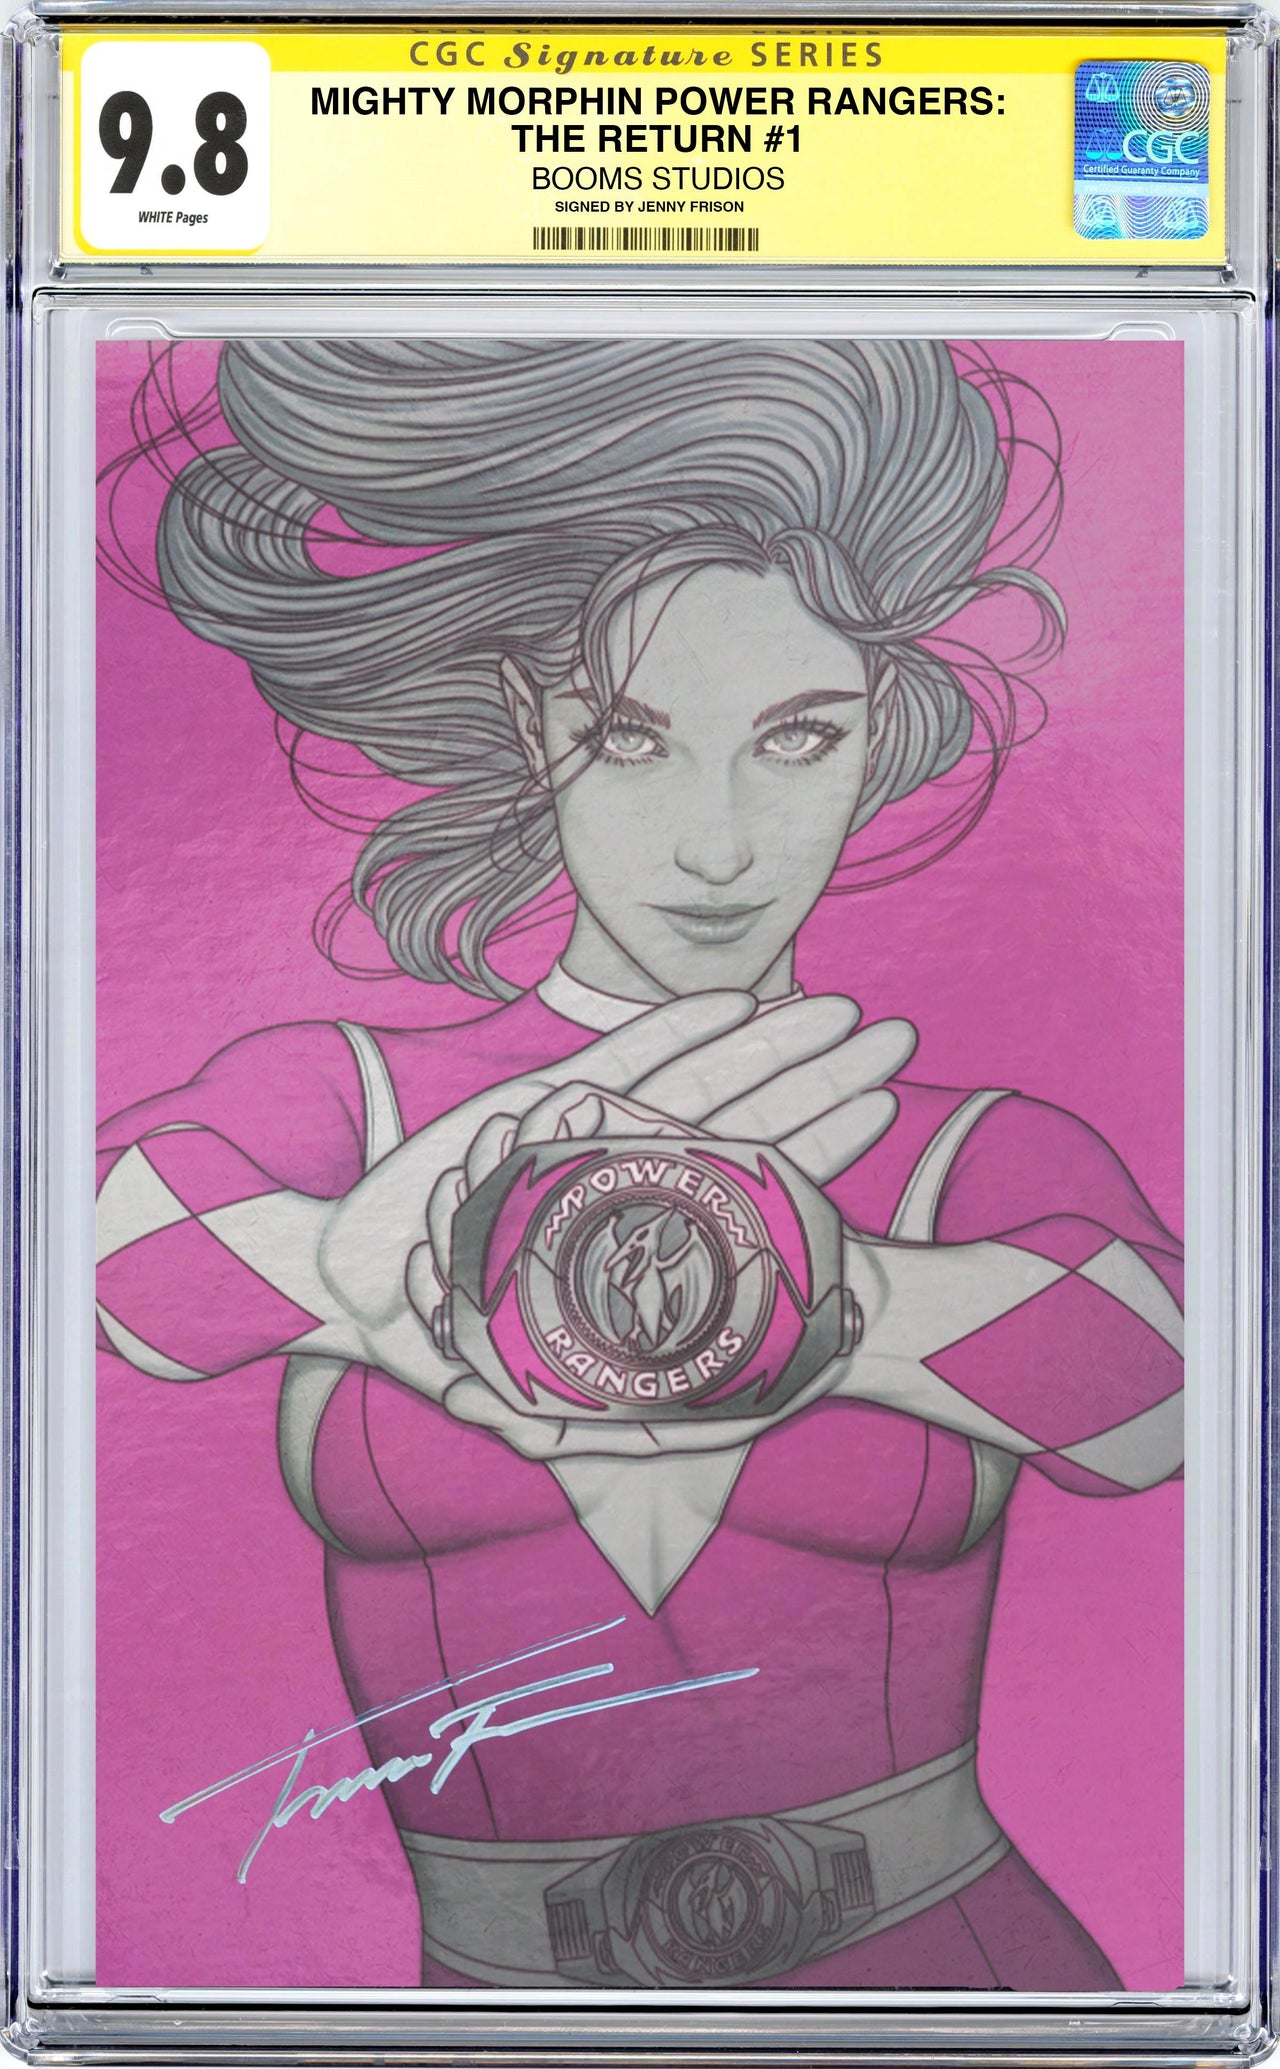 Mighty Morphin Power Rangers: The Return #1 CGC SS 9.8 Megacon Exclusive Foil Cover Signed by Jenny Frison